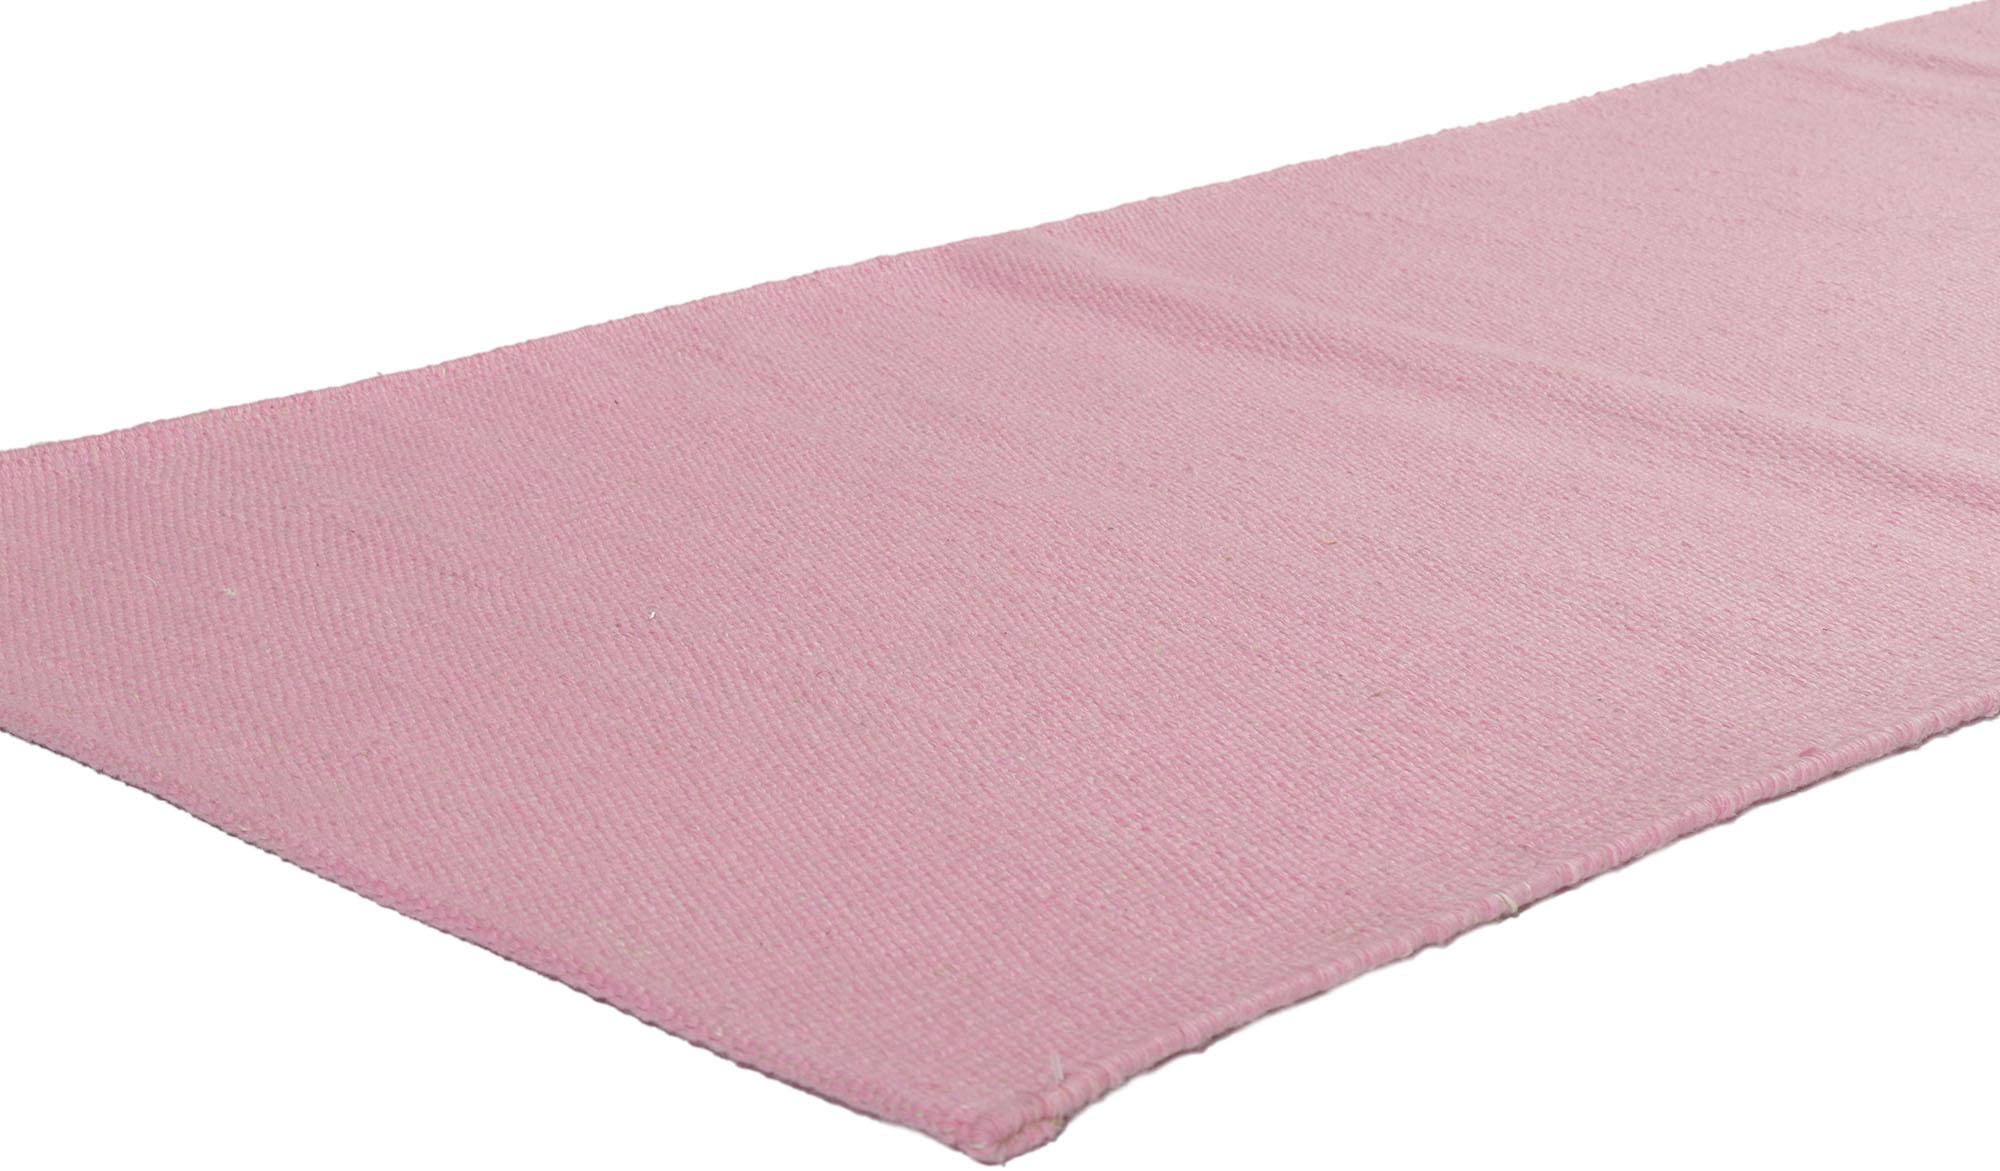 30691 New Swedish inspired pink Kilim runner with Scandinavian Modern style 03'01 x 11'10. ??From subtle to sensation with bohemian hygge vibes, this hand-woven wool Swedish inspired pink Kilim runner beautifully embodies the simplicity of